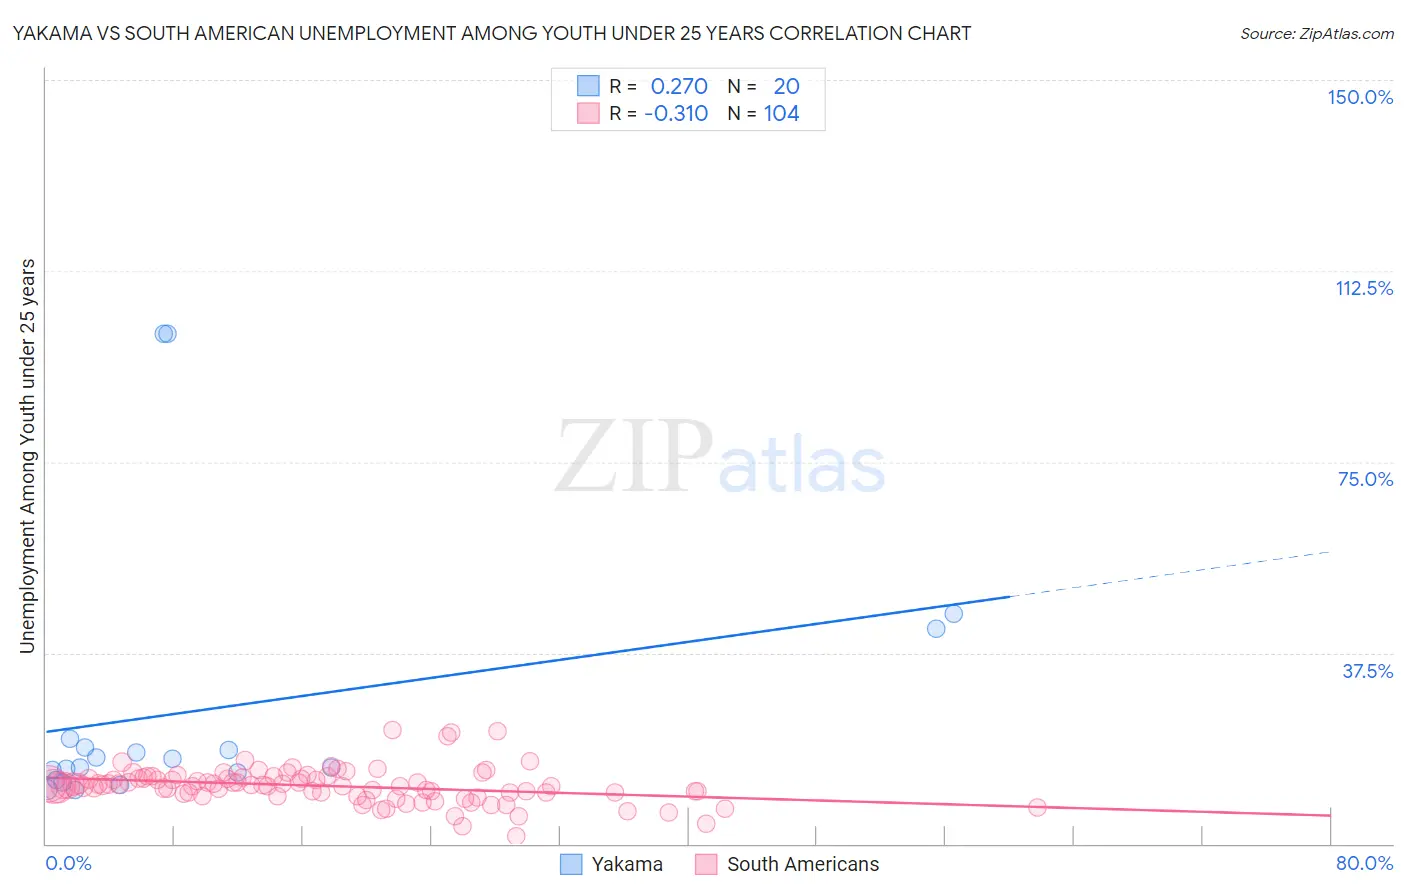 Yakama vs South American Unemployment Among Youth under 25 years